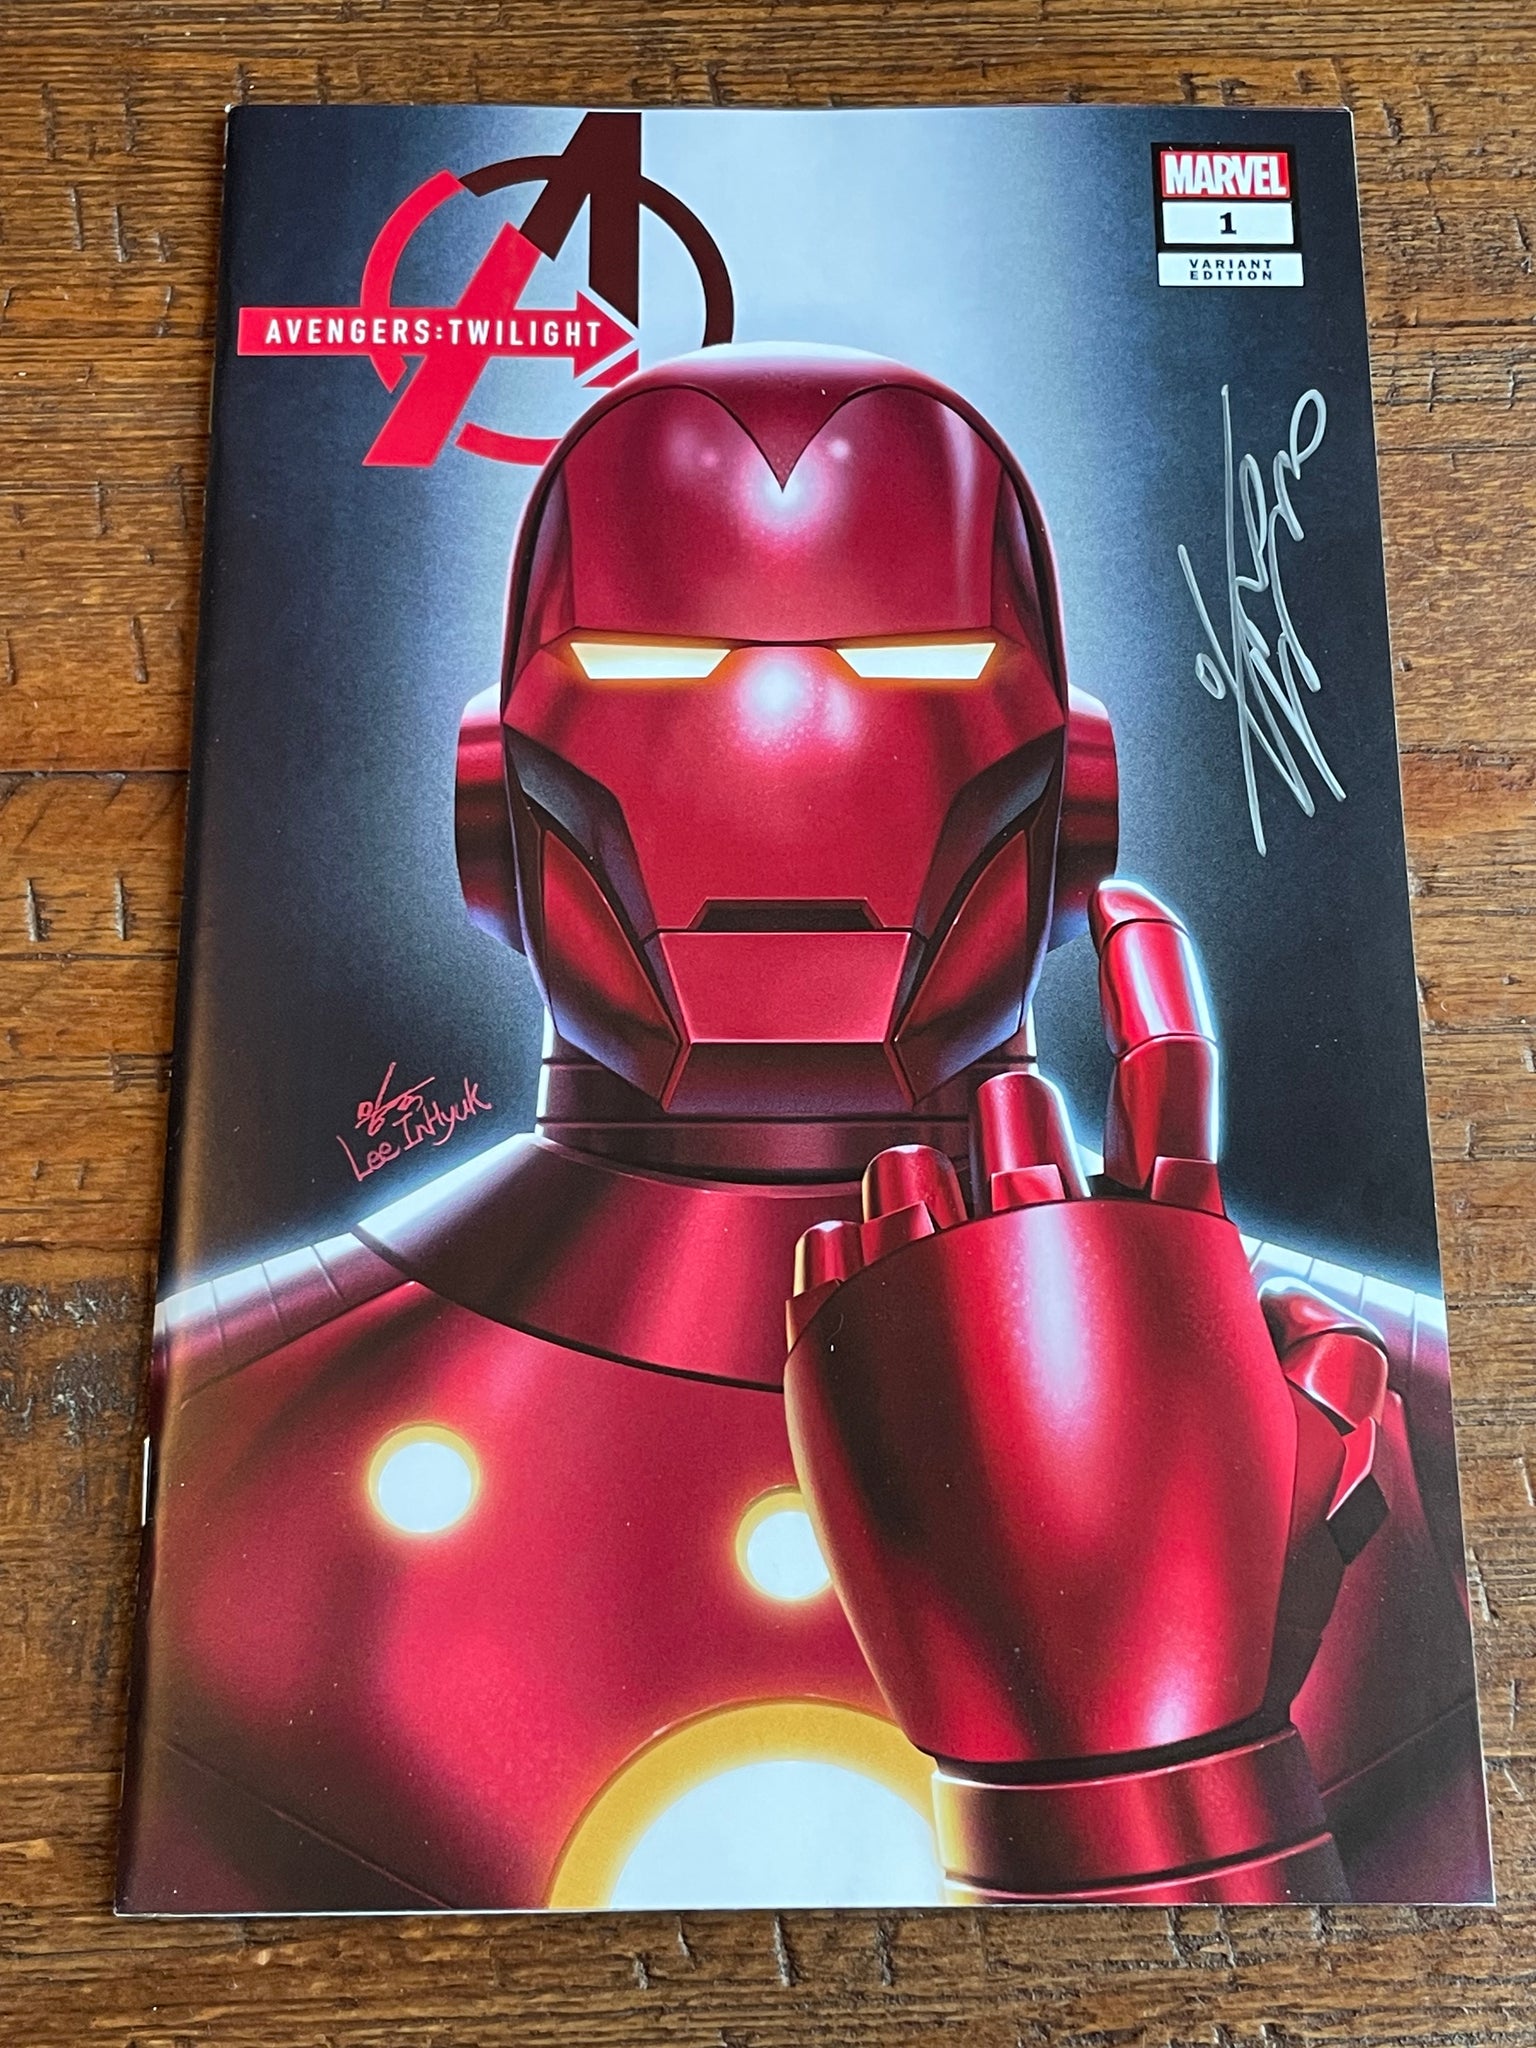 AVENGERS TWILIGHT #1 INHYUK LEE SIGNED "RED" IRON MAN VARIANT LIMITED TO 500